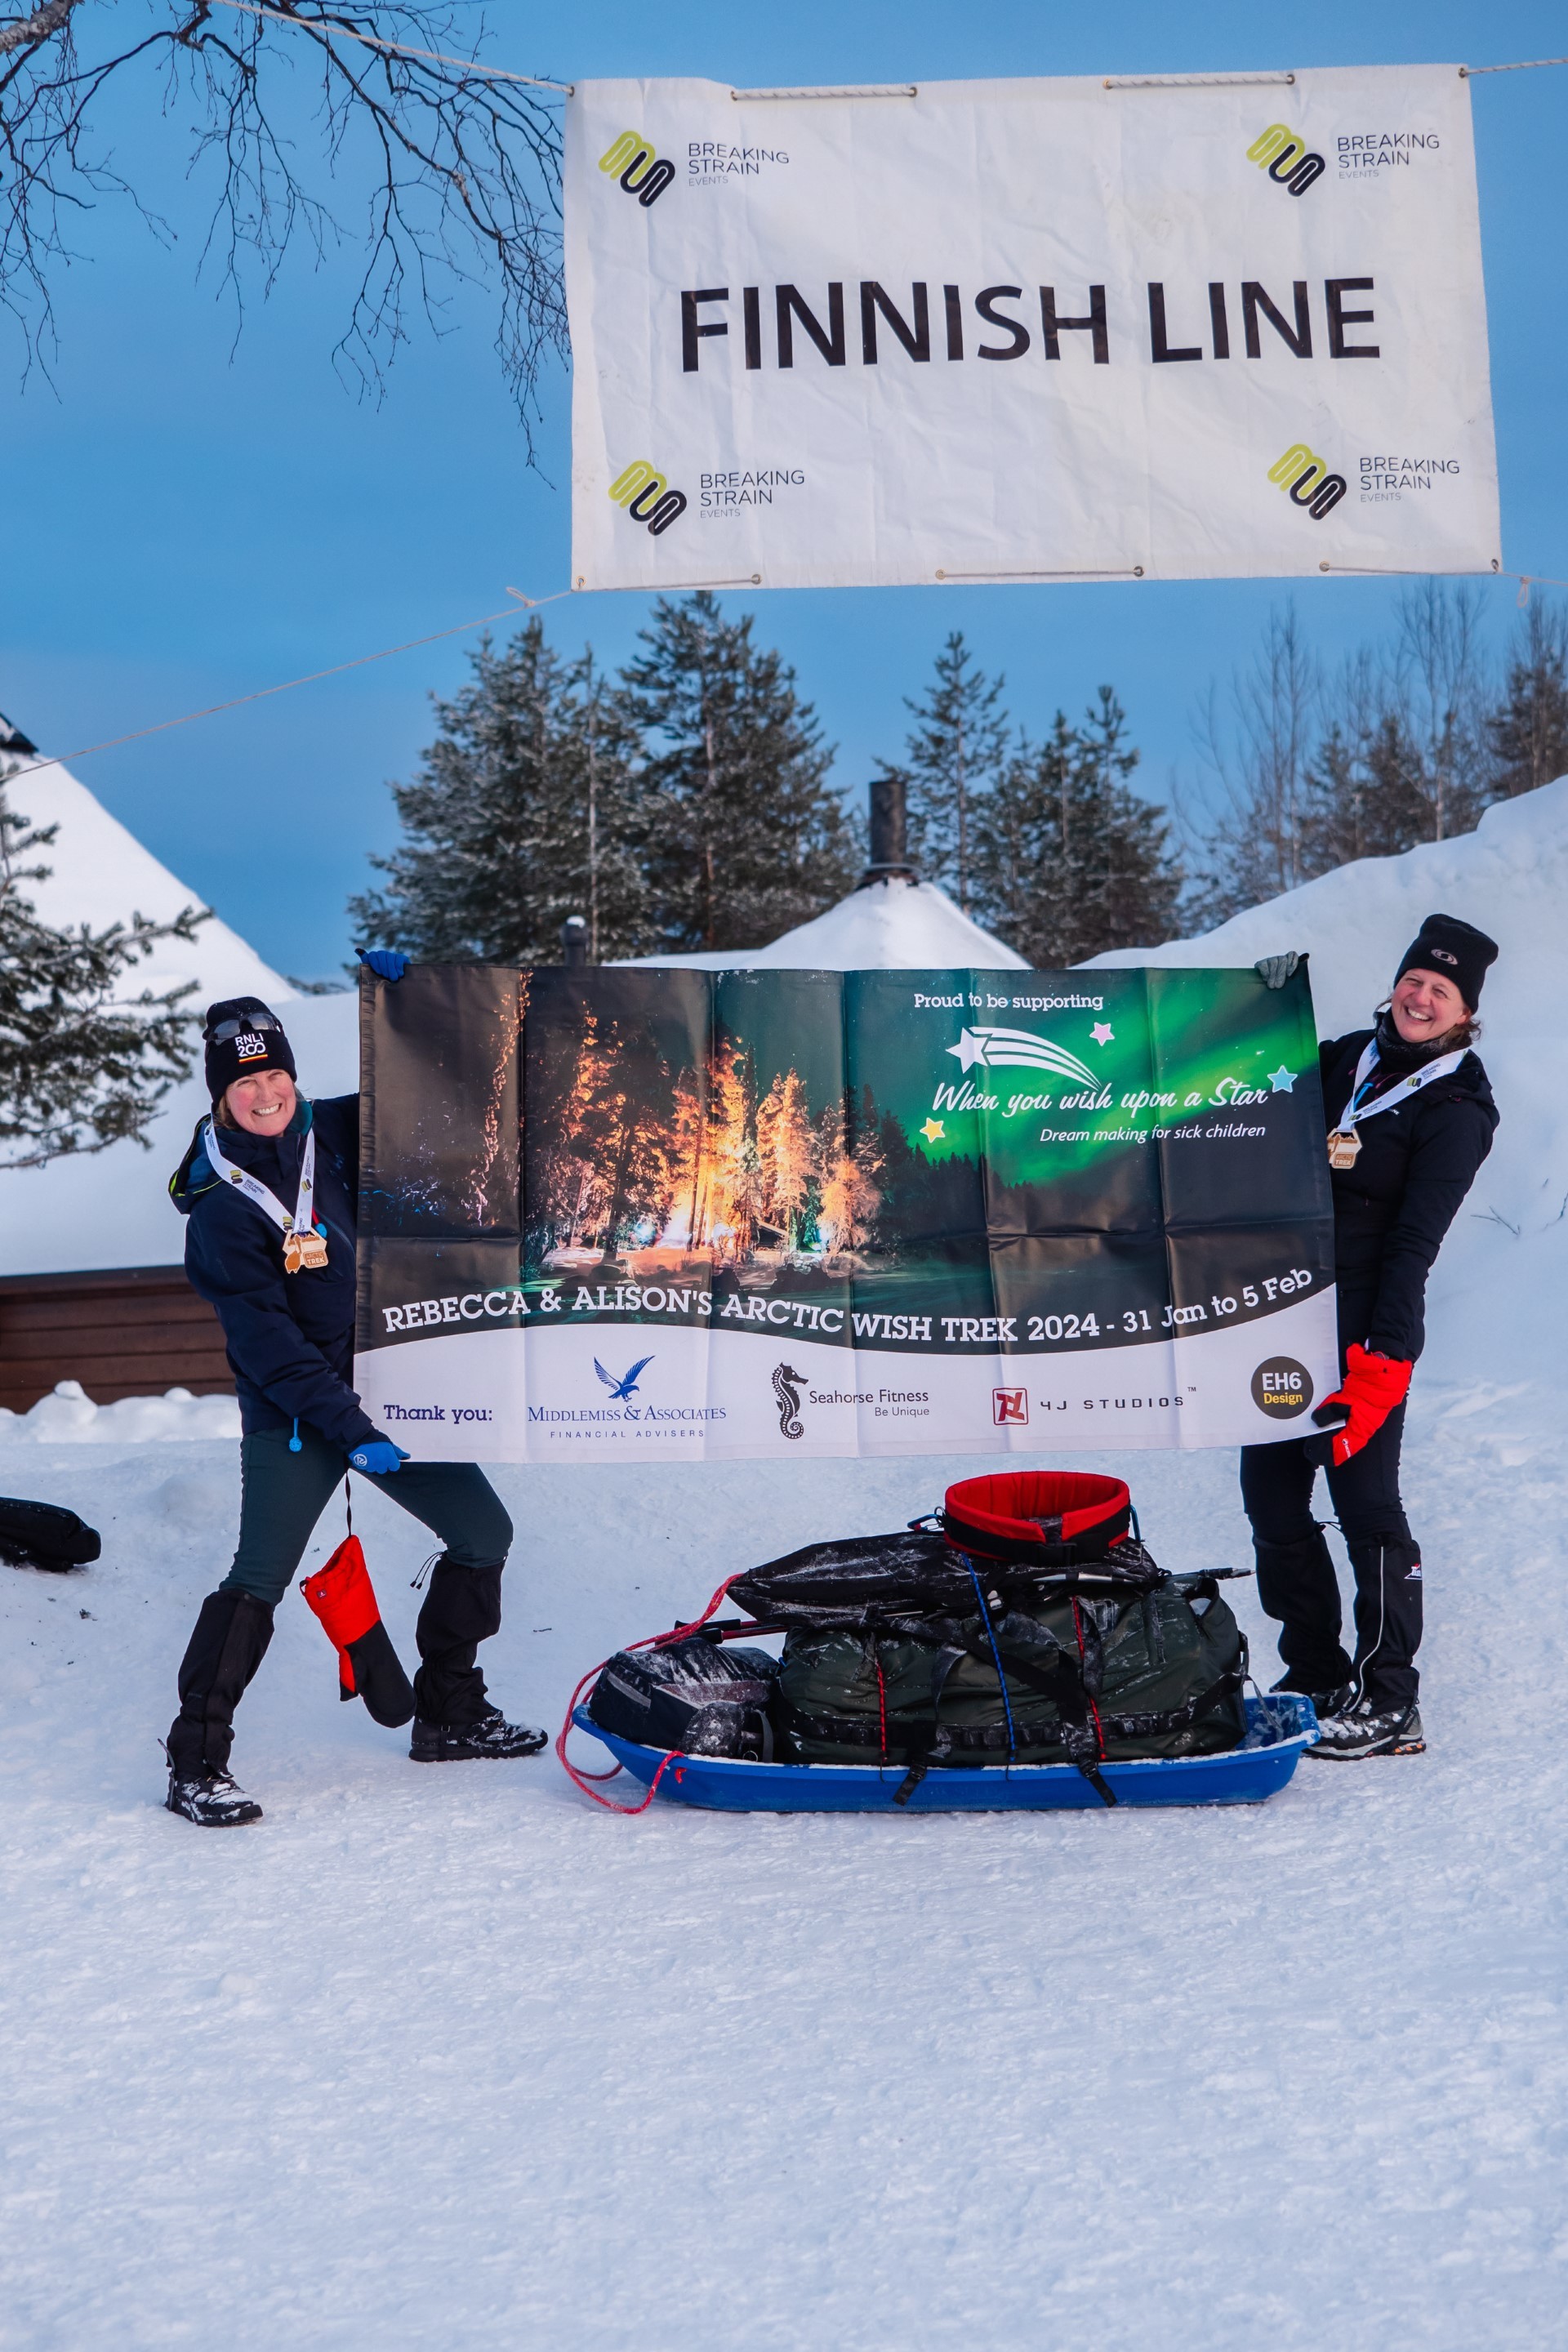 Becs Miller (left) and Alison Wilson covered more than 60 kilometres to reach their Finnish Line. Image: Roll Outdoors